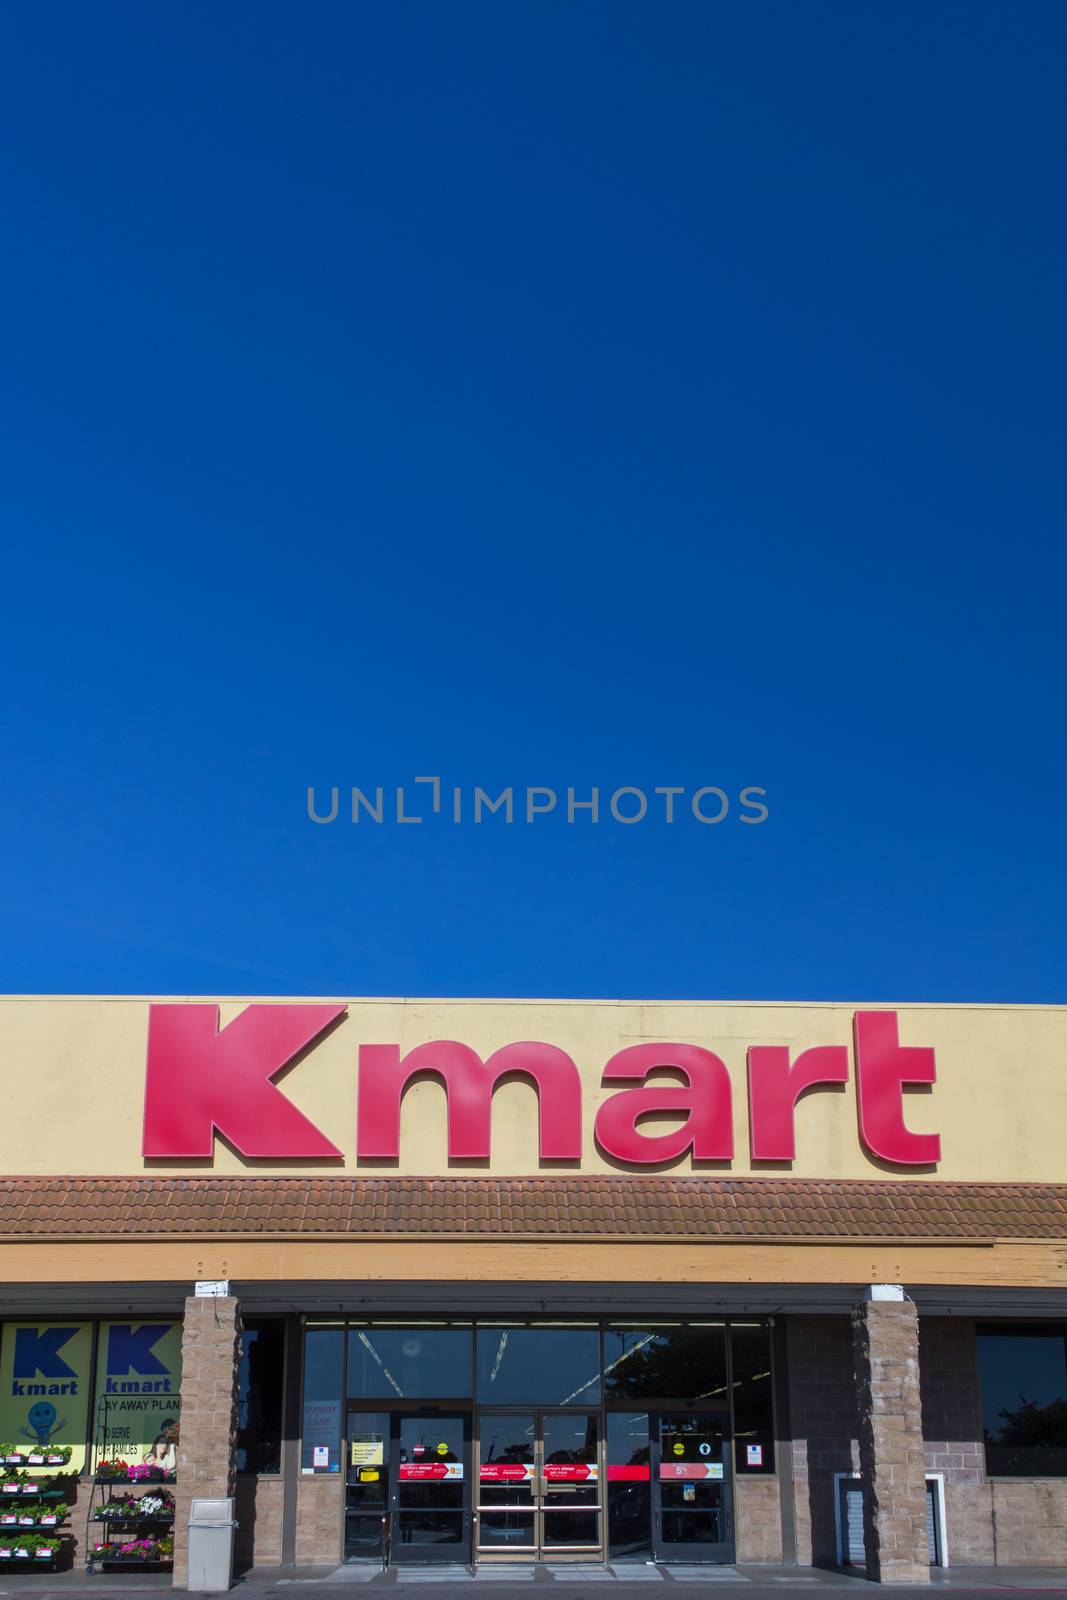 Kmart retail store exterior by wolterk